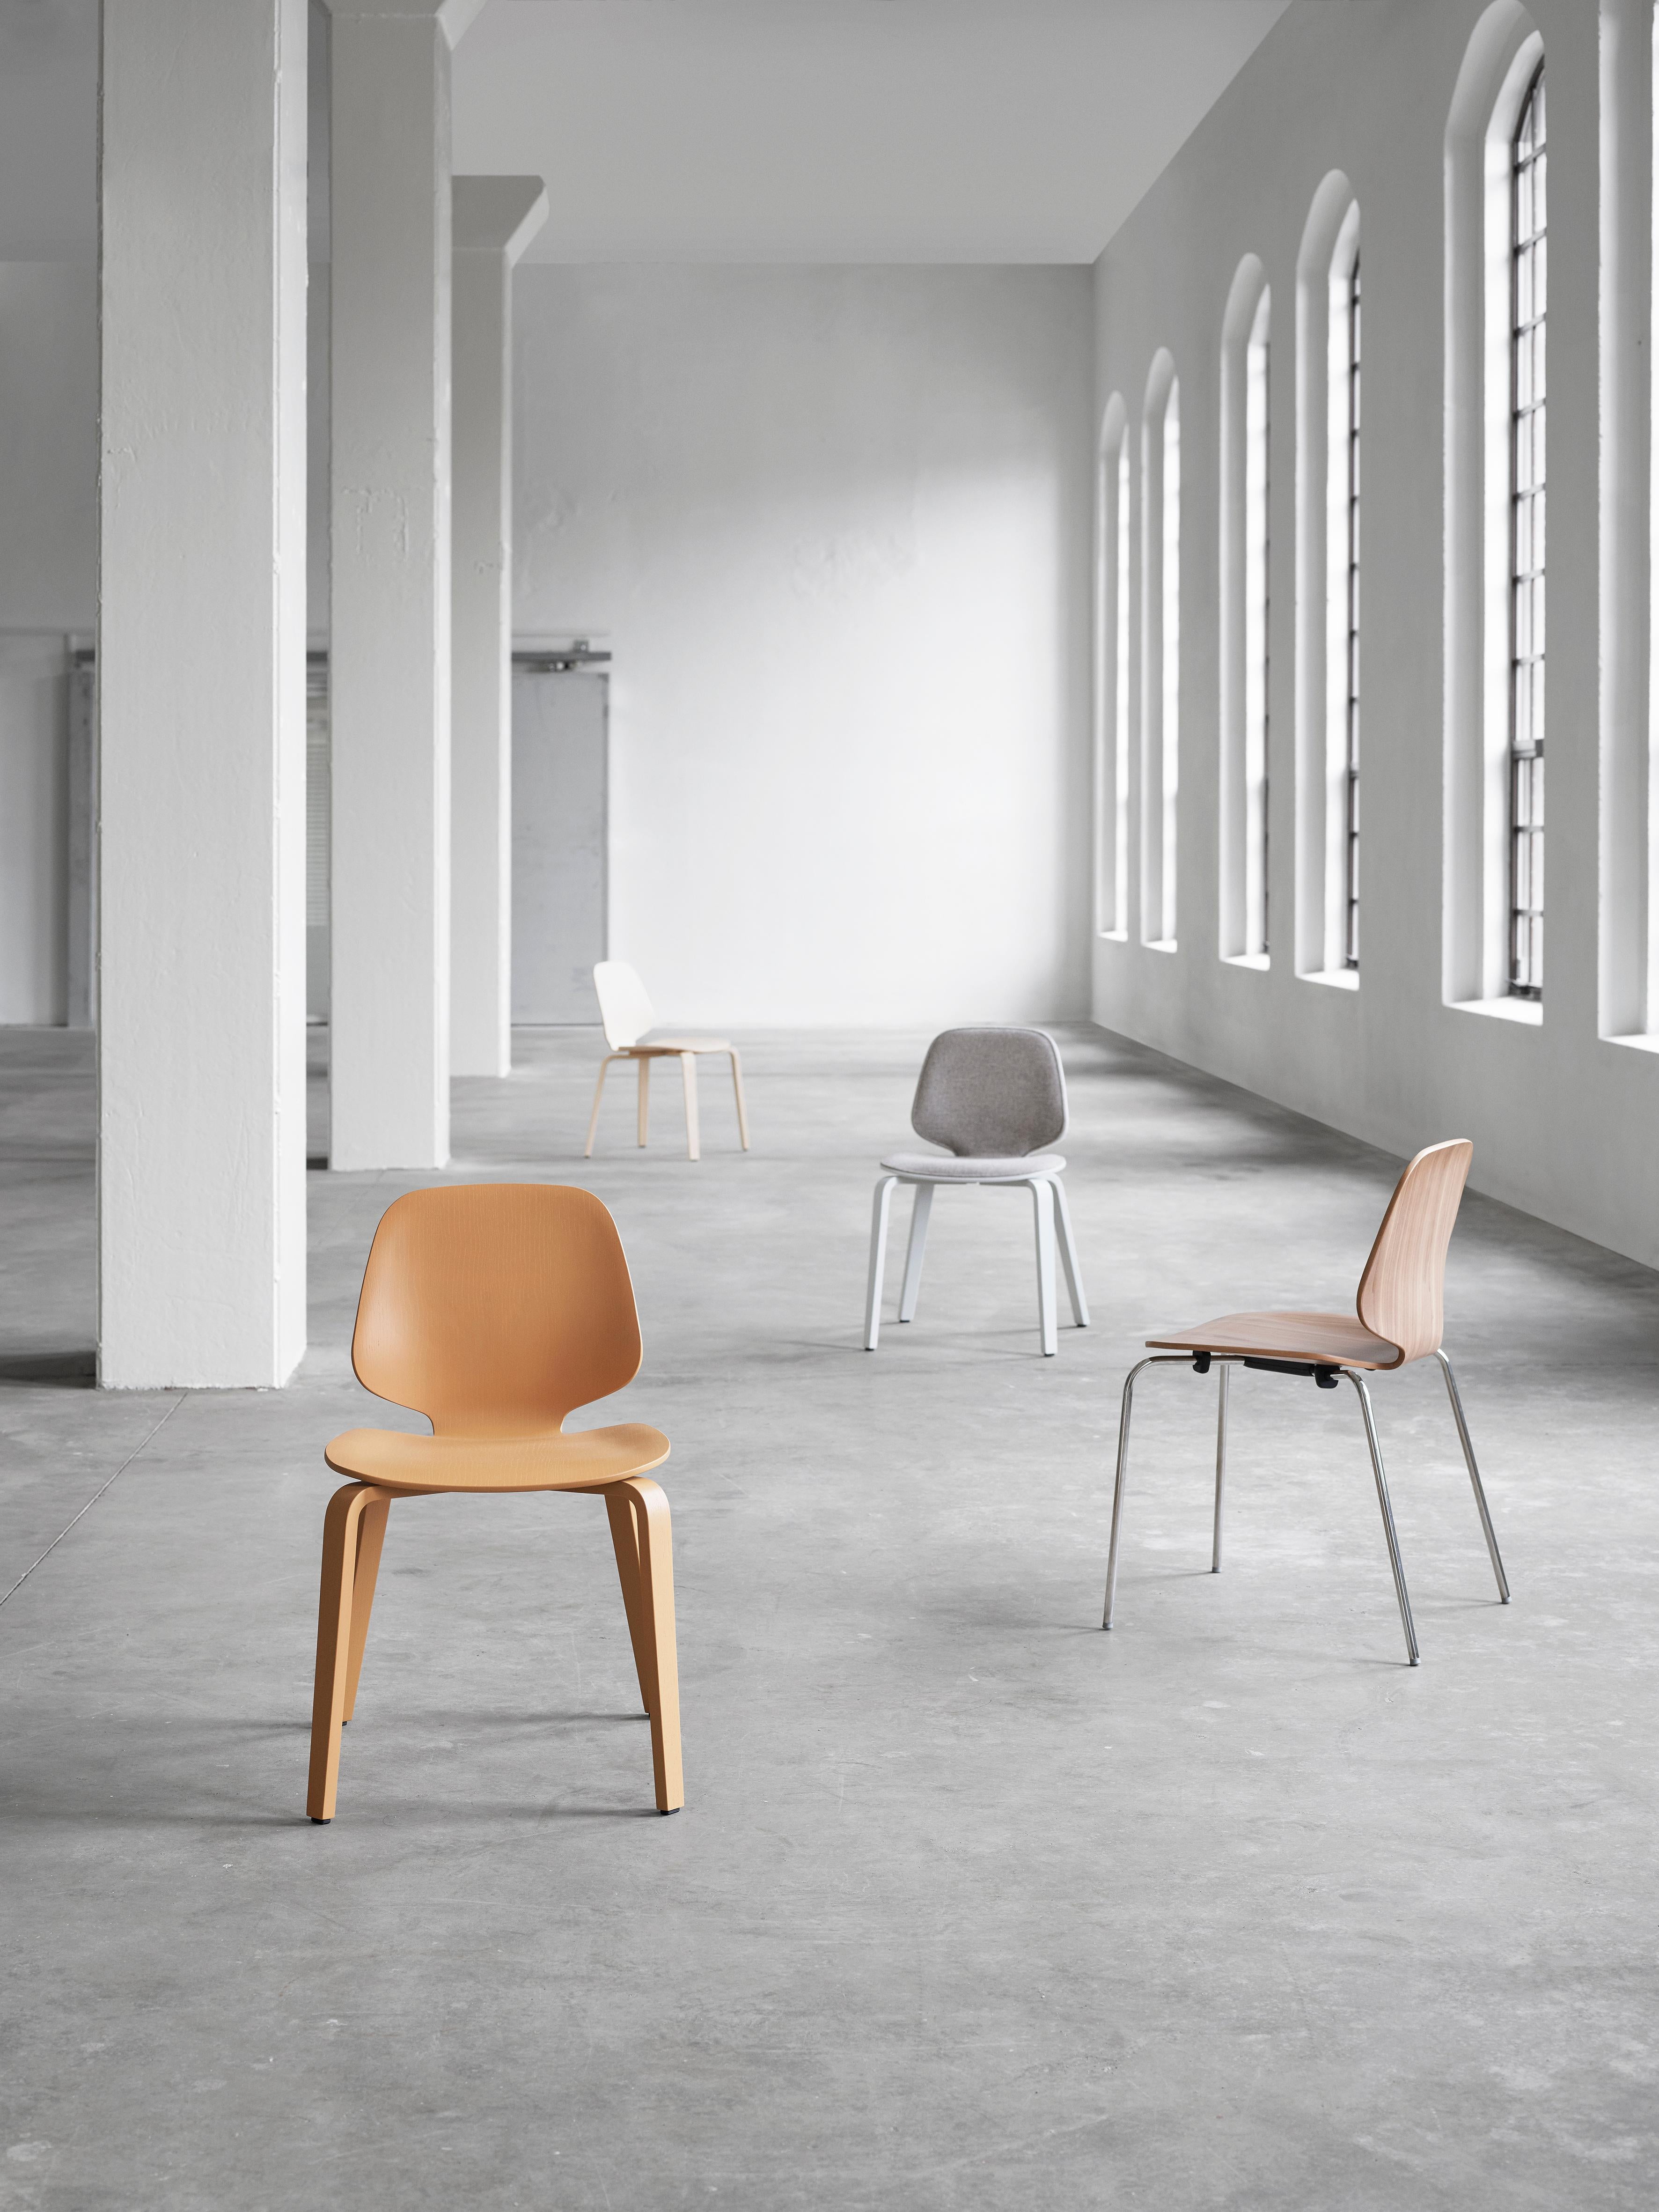 Effortless and timeless, Nicholai Wiig Hansen’s My Chair from 2013 is just about as close as you get to a new Classic: a minimal chair in molded veneer, that moves gently with your body. The rounded corners and curved waist counterbalance the